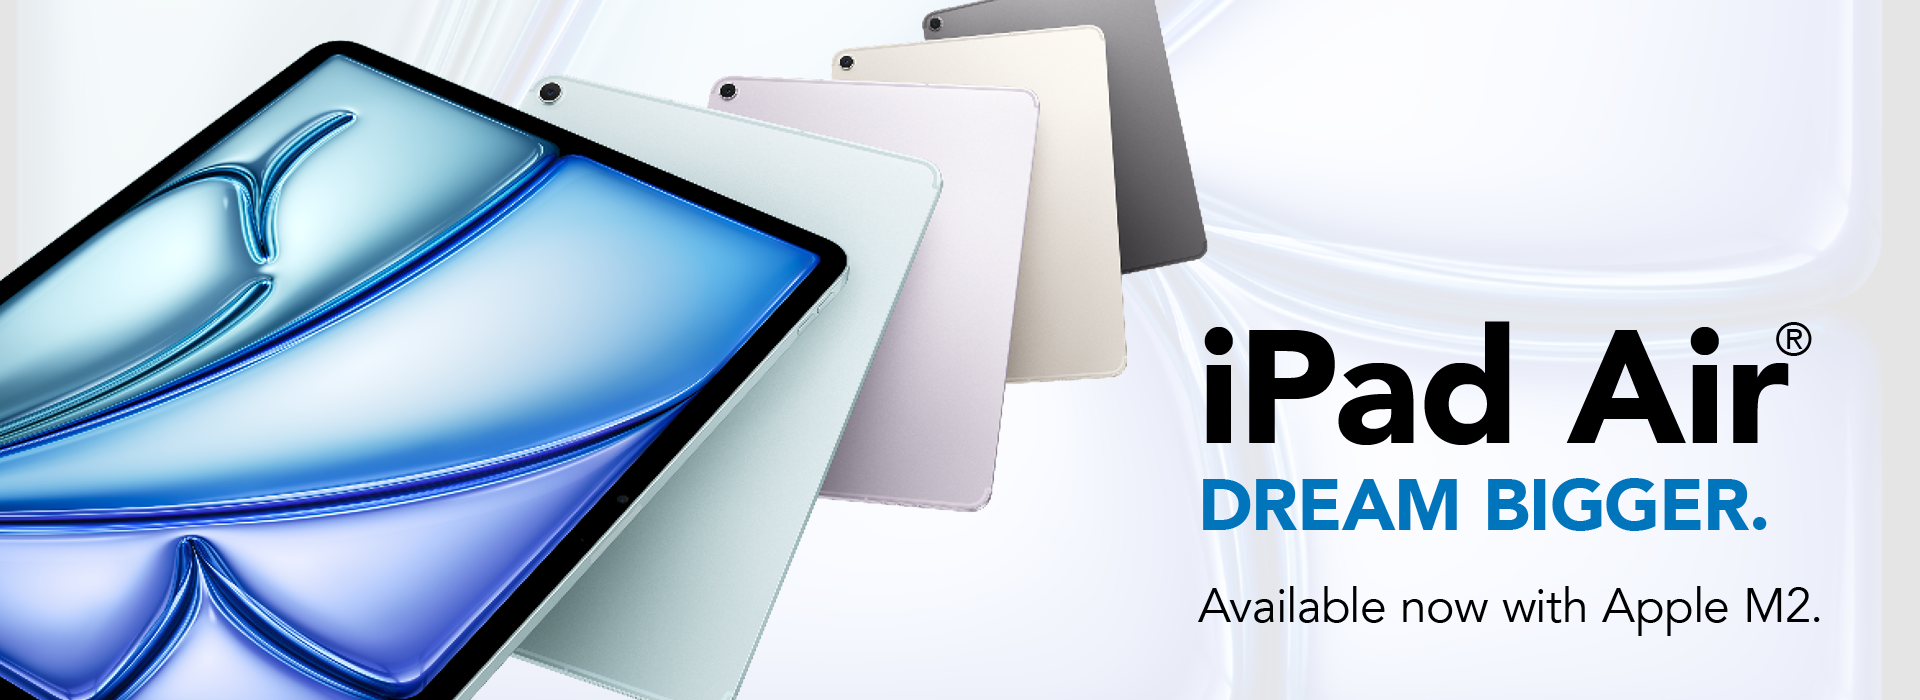 new i Pad Air dream bigger now with Apple M 2